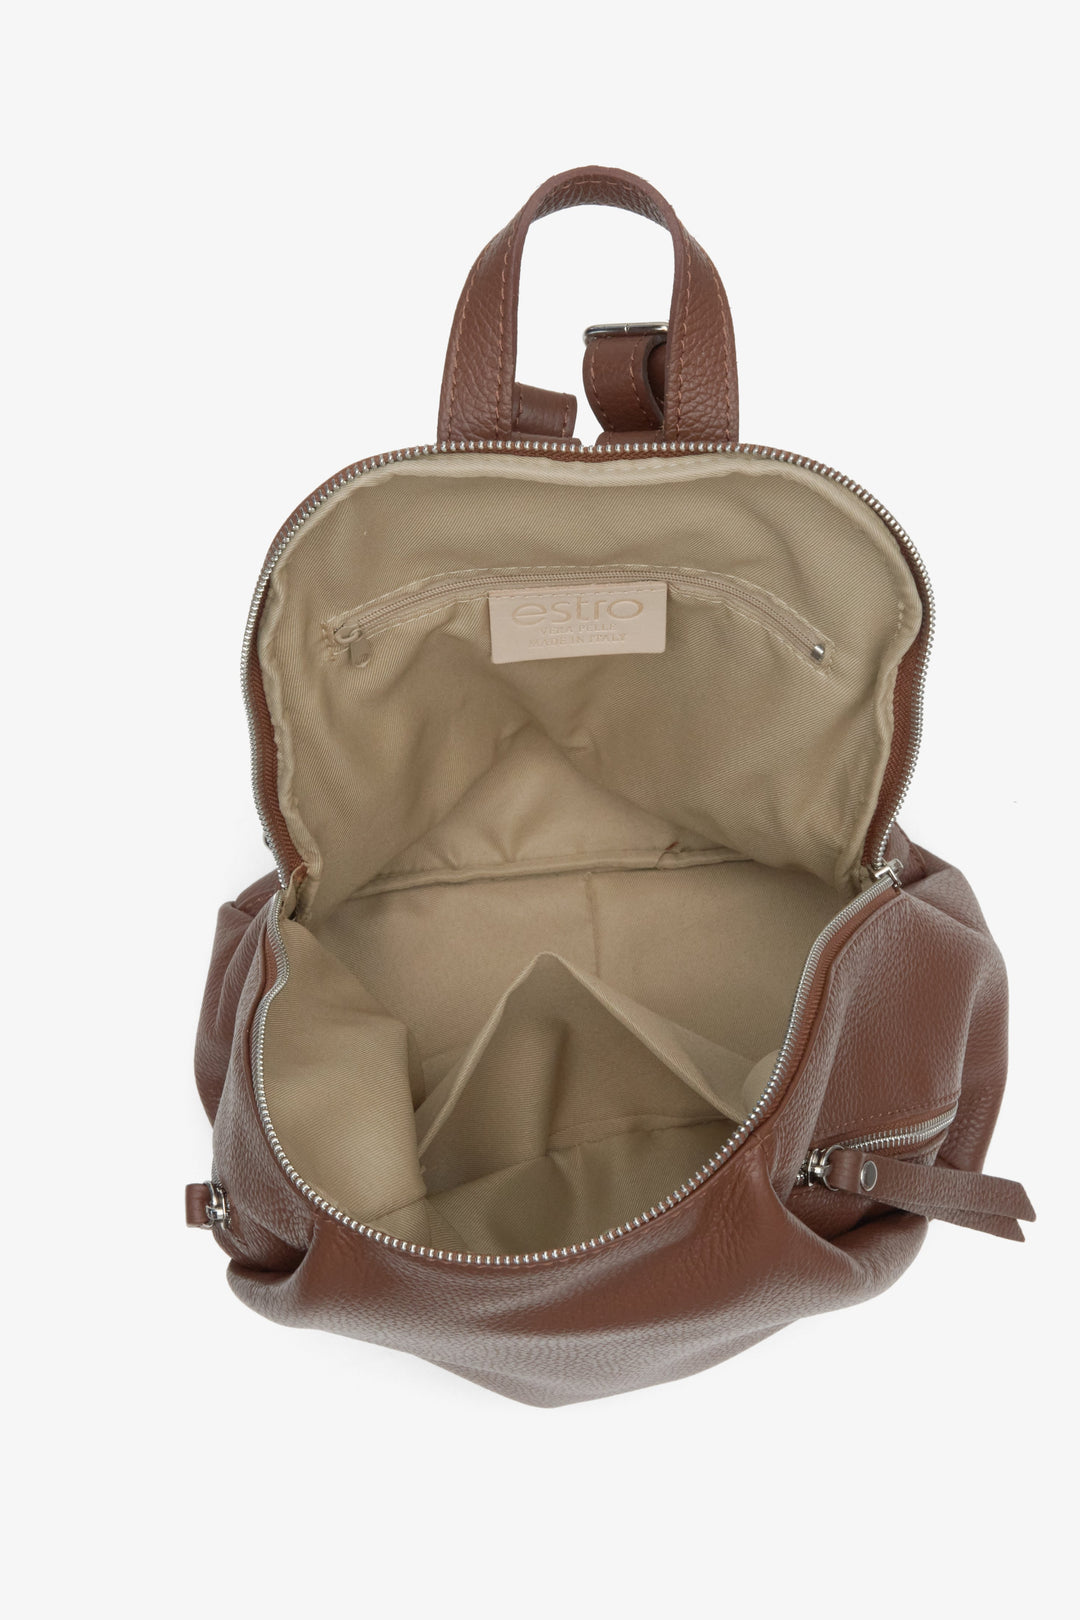 Women's brown leather backpack with silver accents - close-up on the lining.